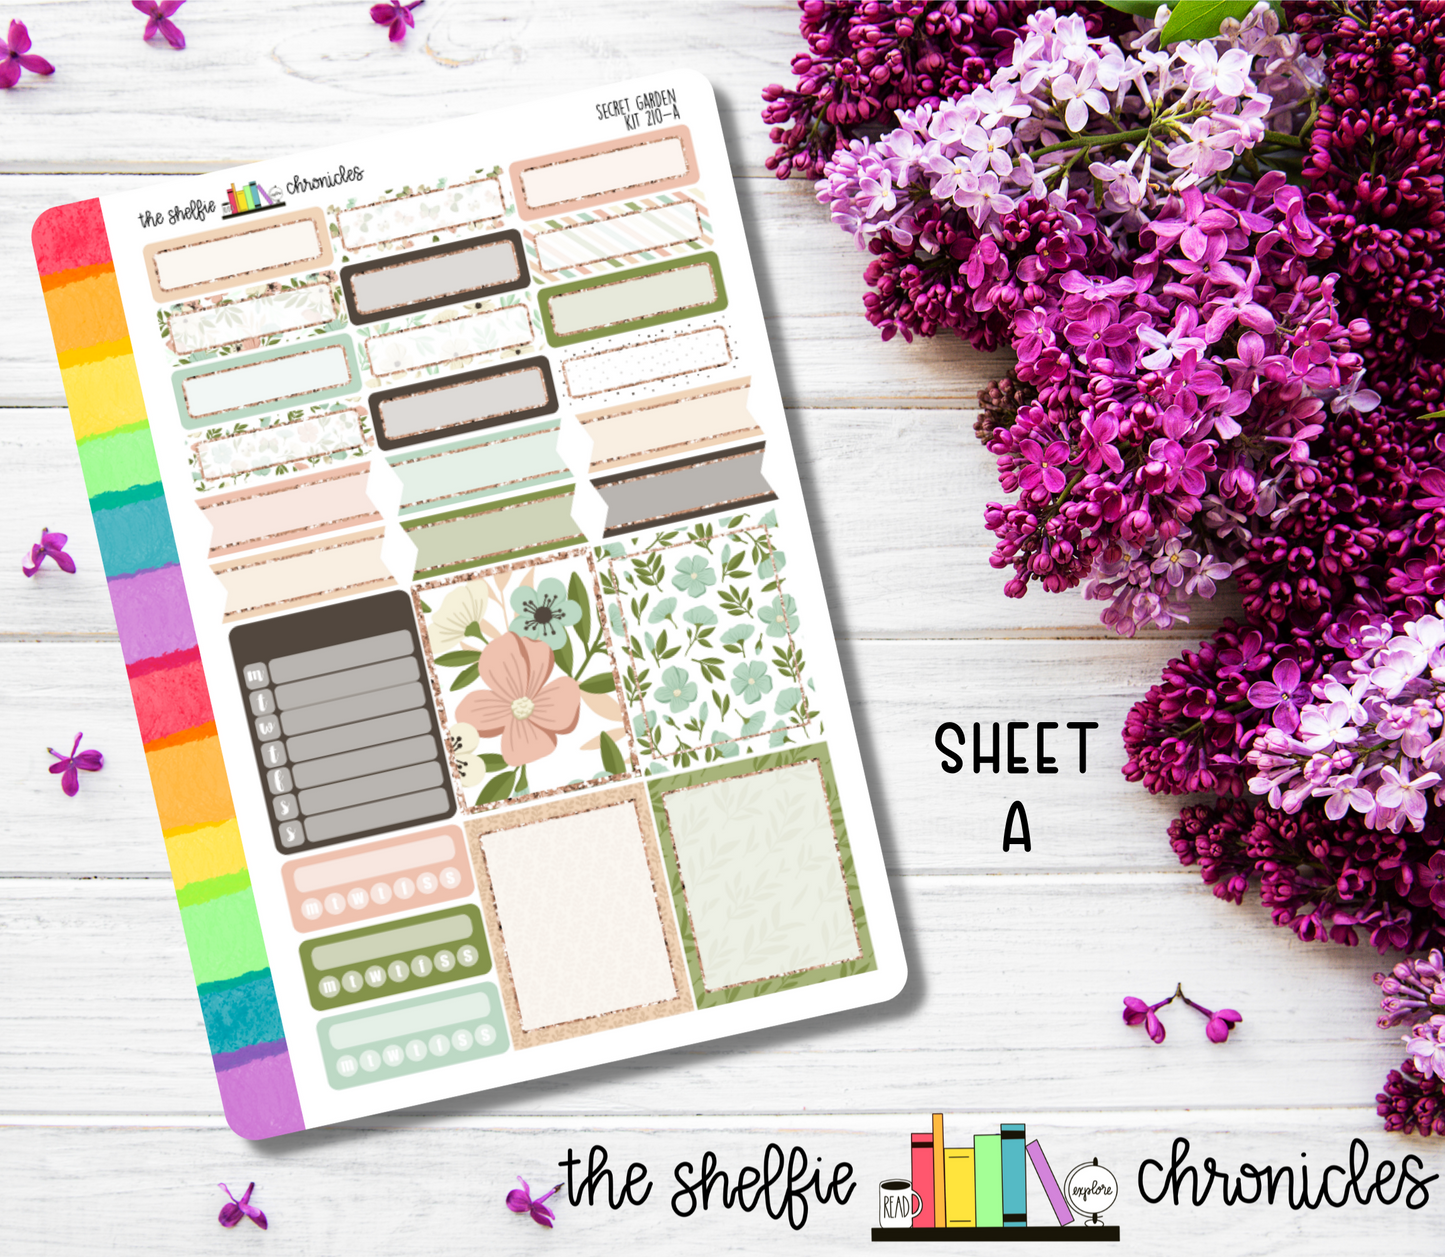 Kit 210 - Secret Garden Weekly Kit - Die Cut Stickers - Repositionable Paper - Made To Fit 7x9 Planners